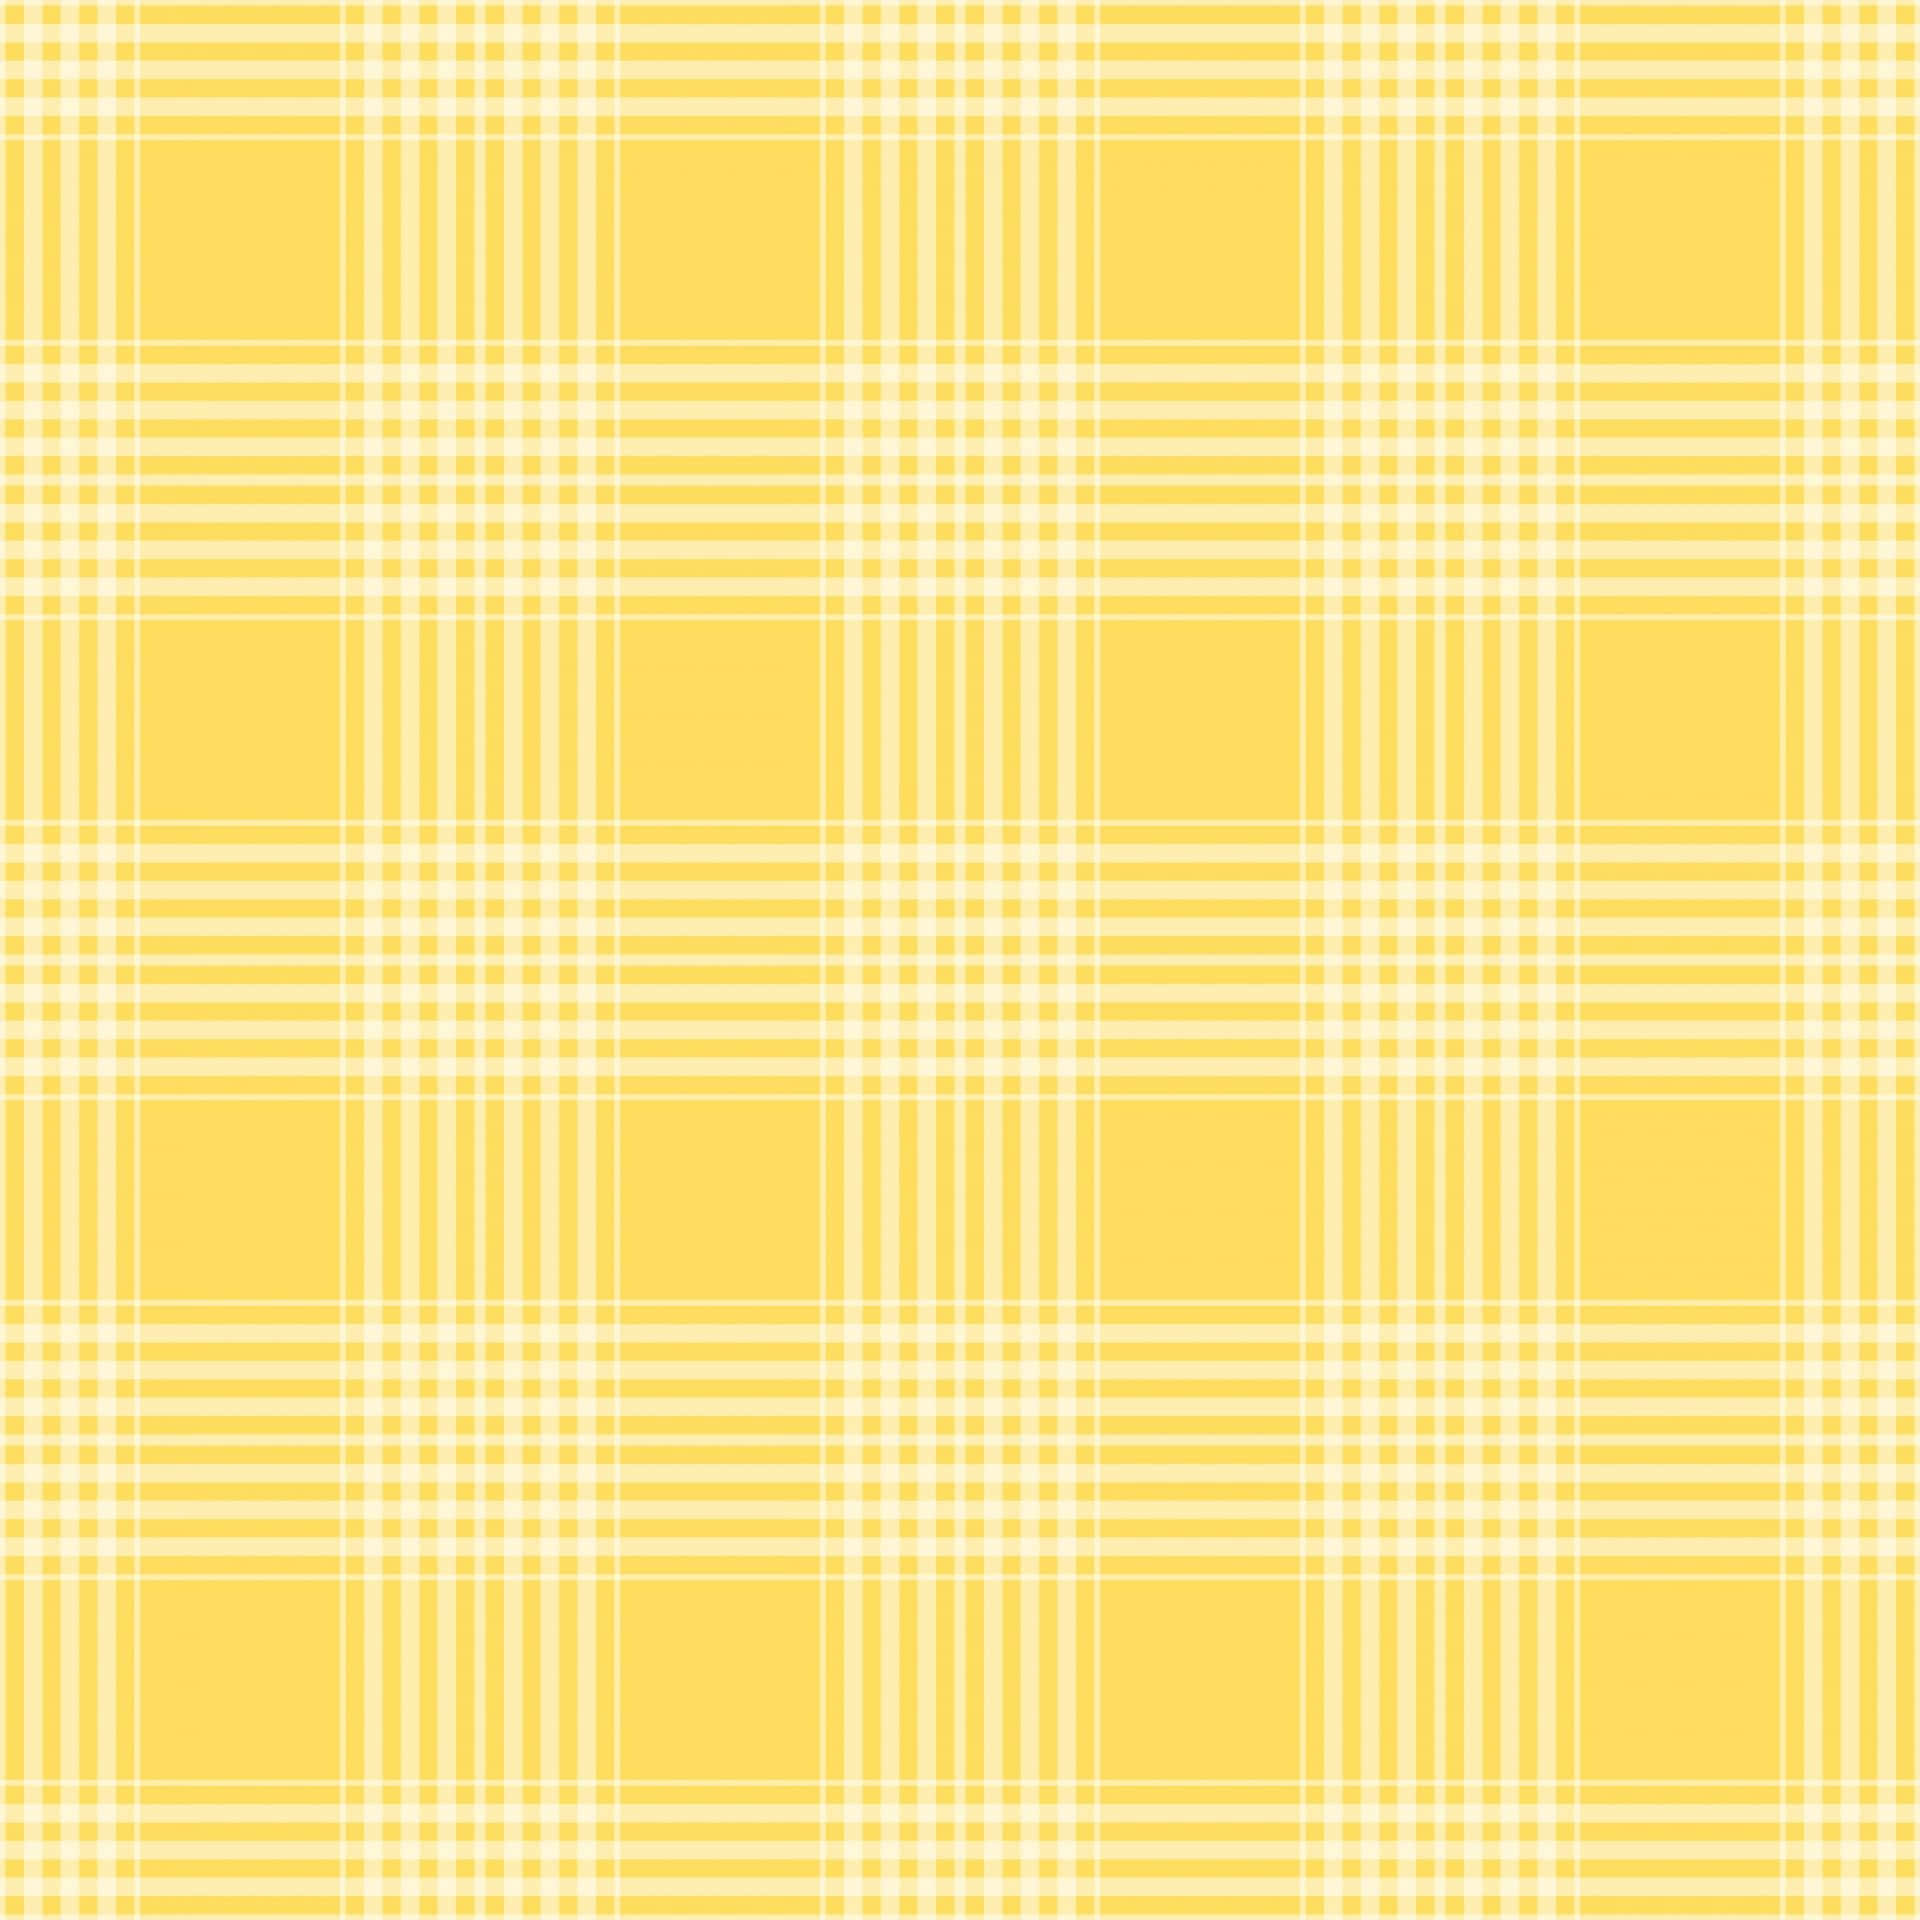 'Make a bold statement with Aesthetic Yellow Plaid!' Wallpaper